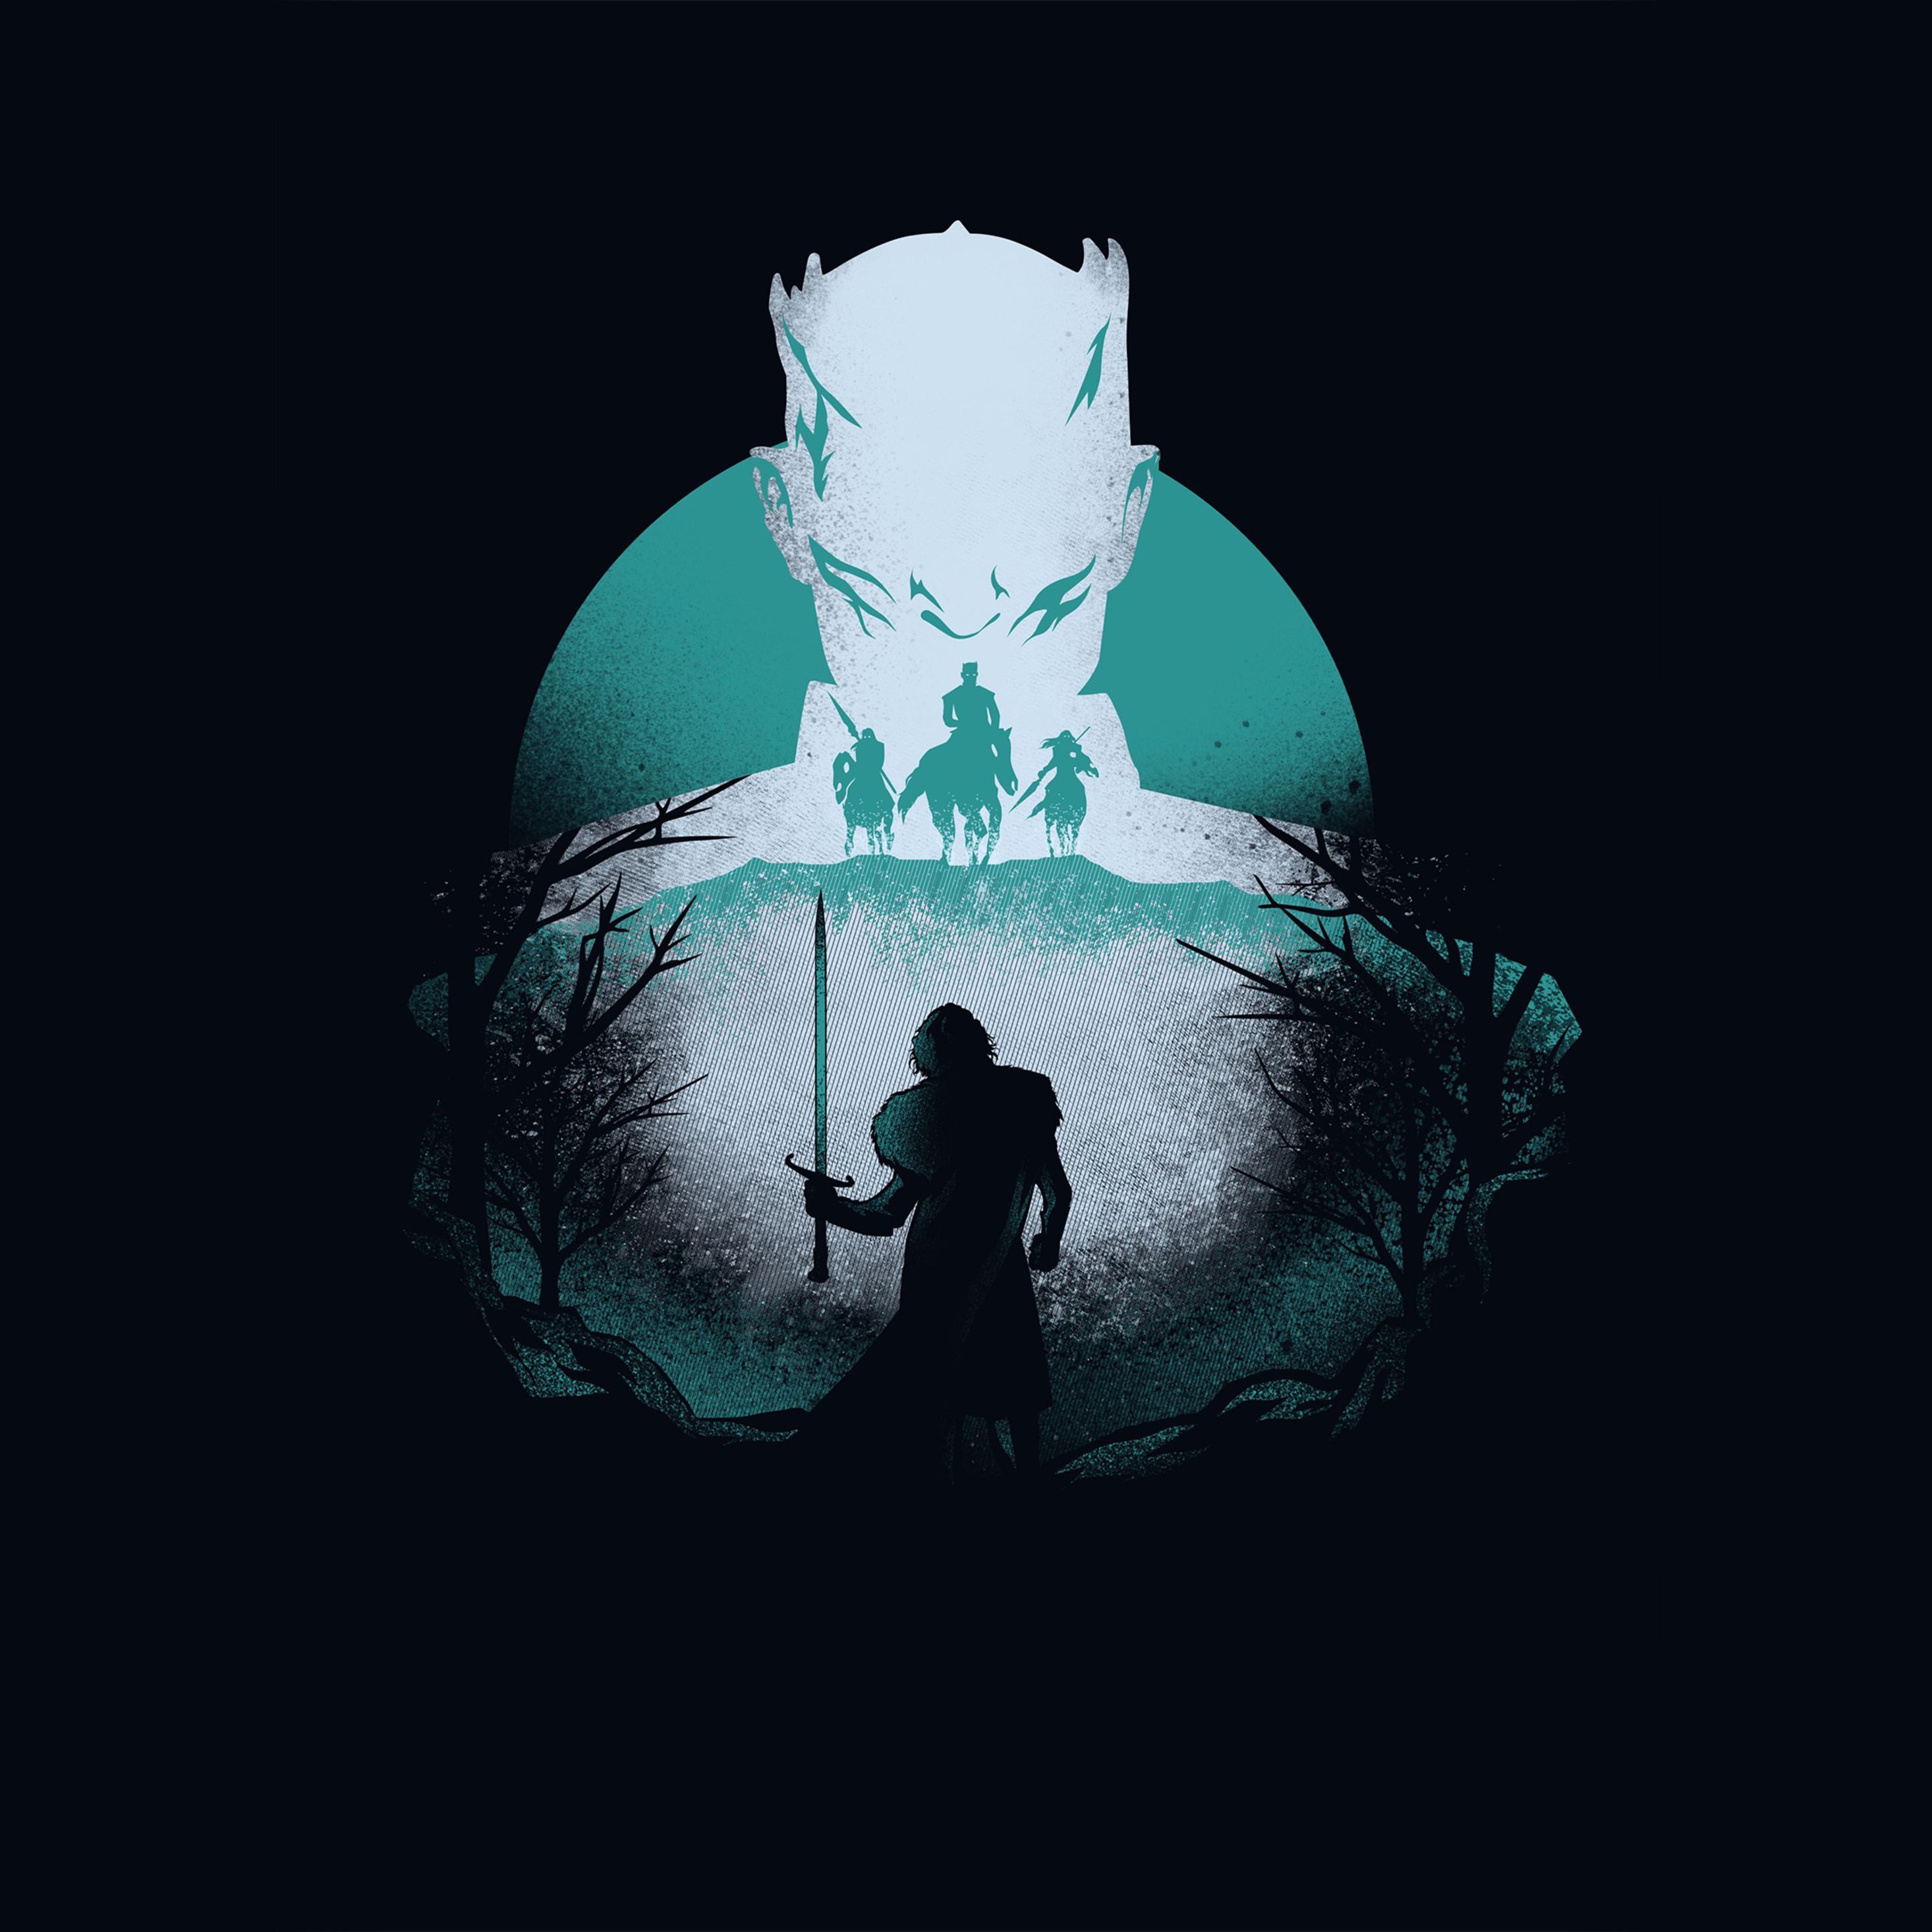 Game Of Thrones 4k Wallpaper Android